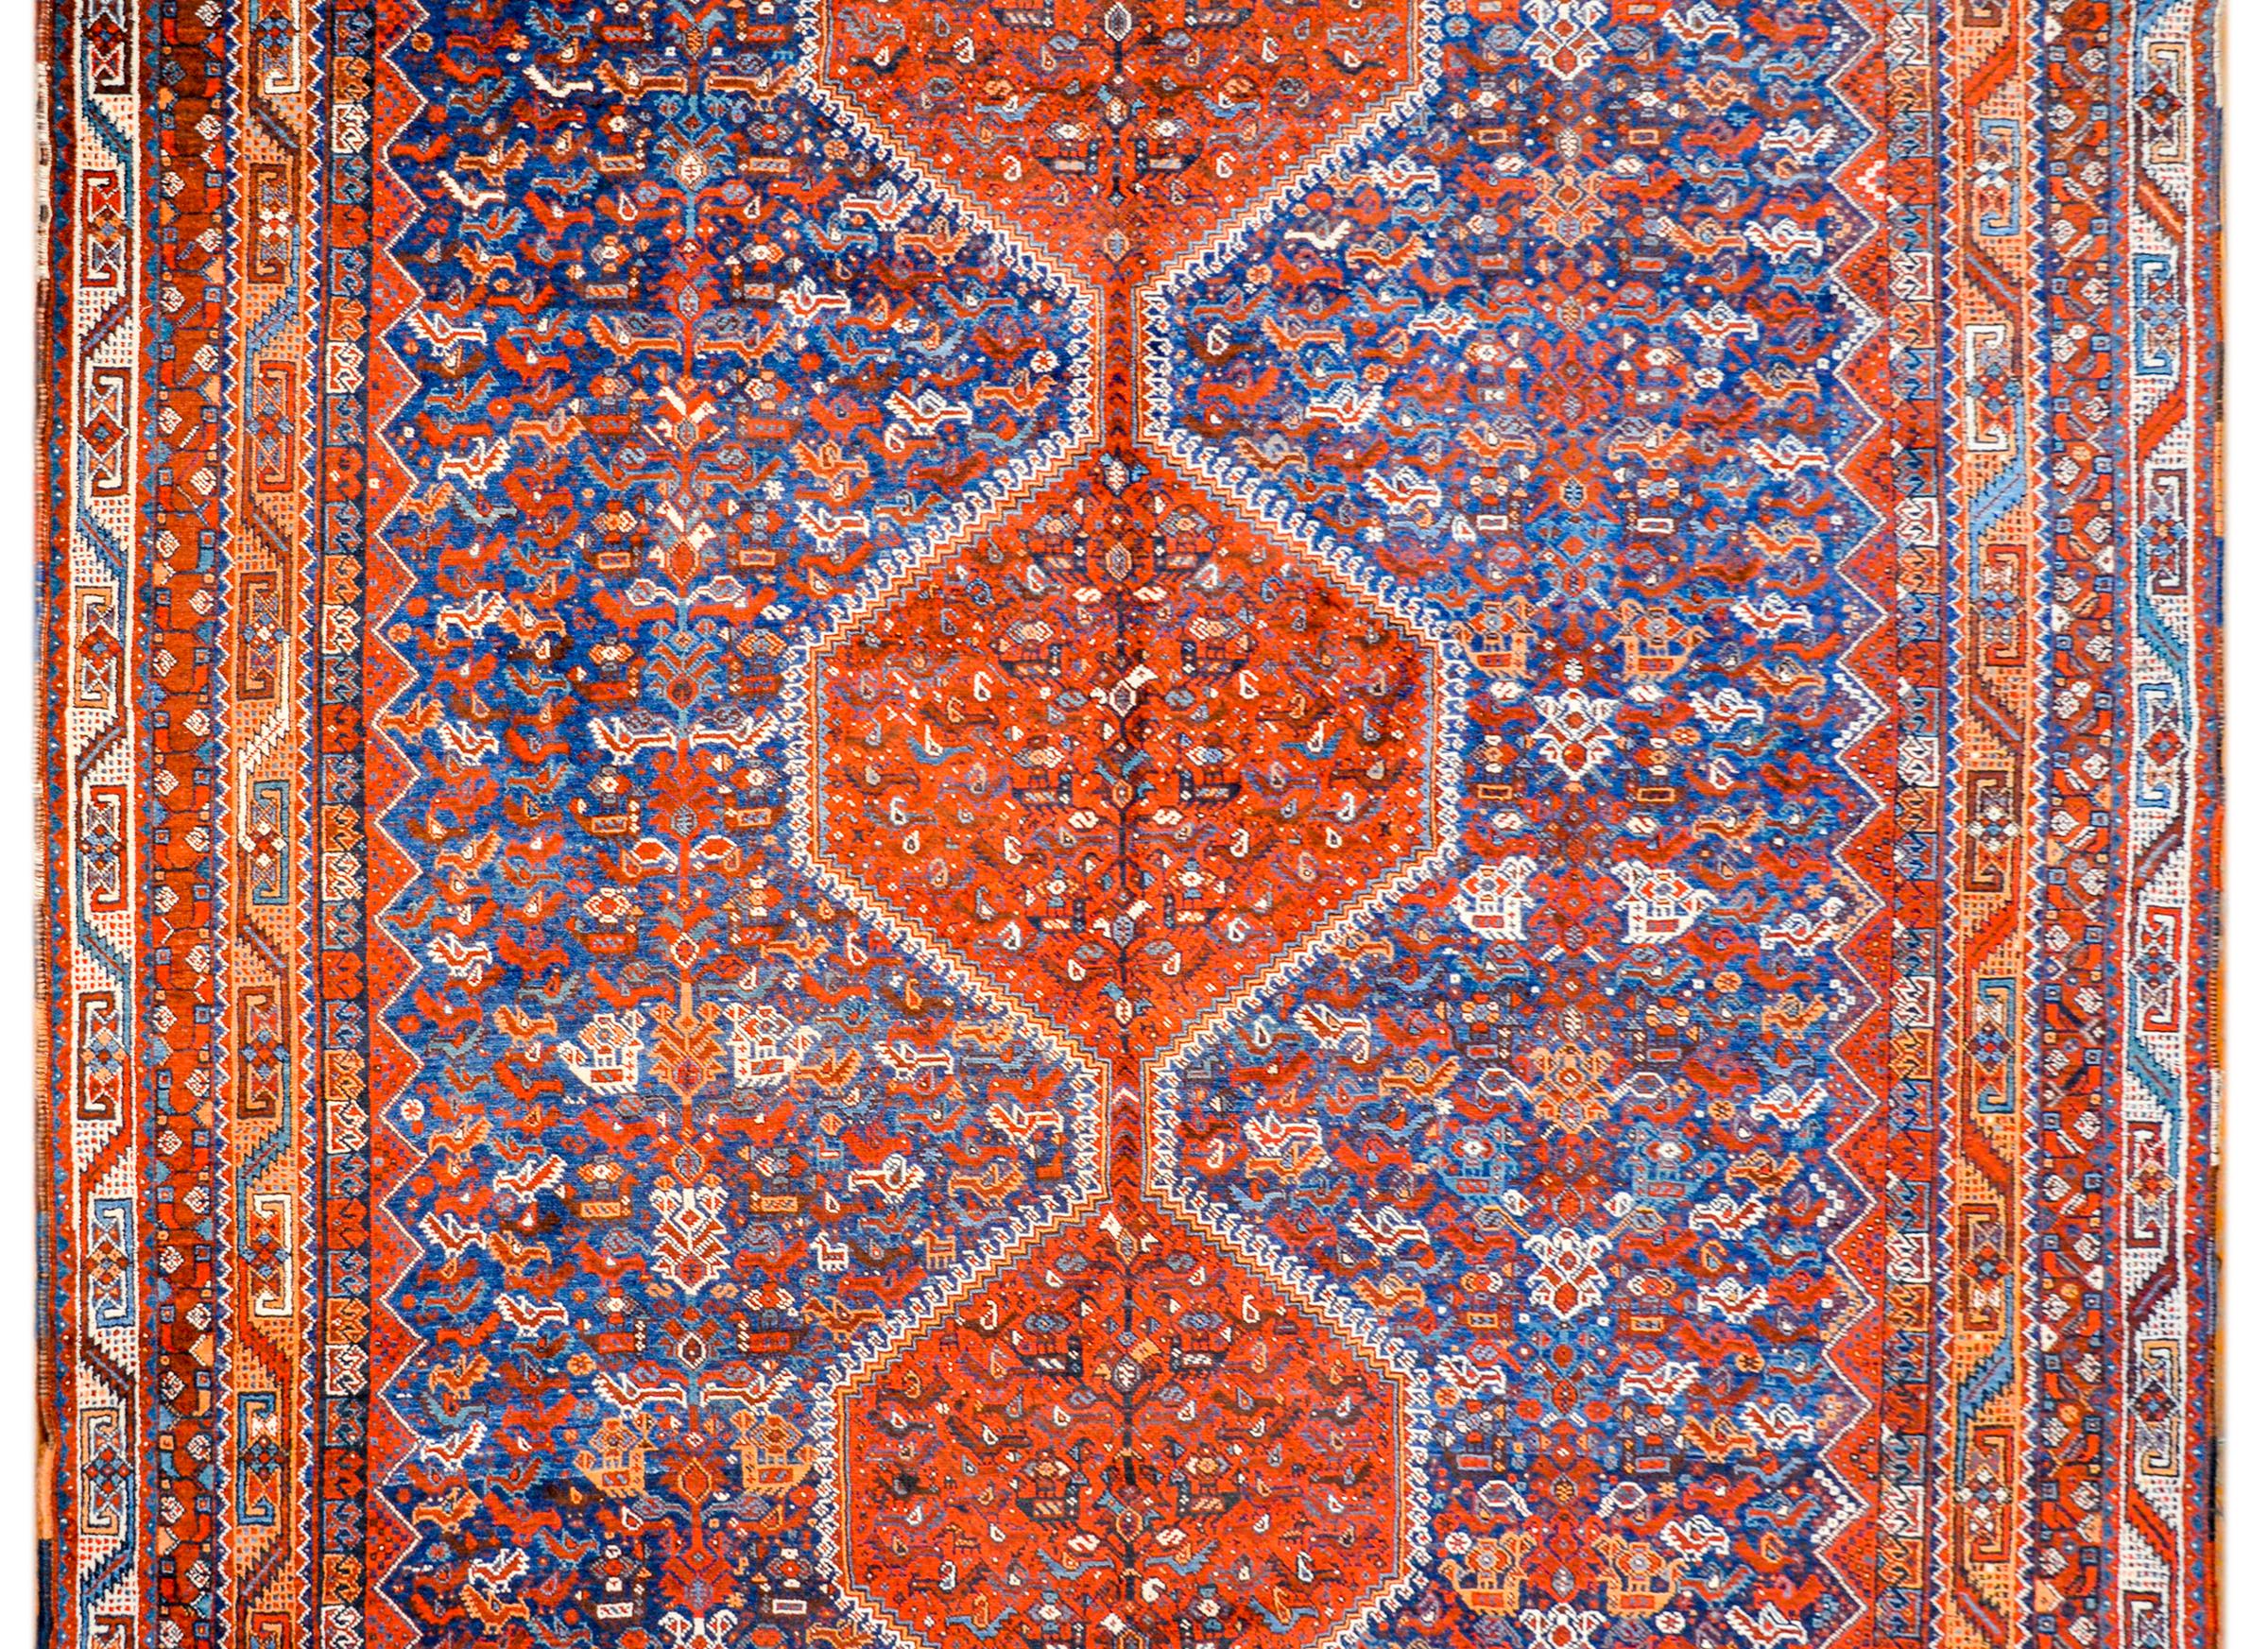 An outstanding early 20th century Persian Khamseh rug with hundreds of multi-colored chickens woven in crimson, white, and gold, on a gorgeous indigo background. The border is extraordinary with multiple thin geometric patterned stripes, woven in